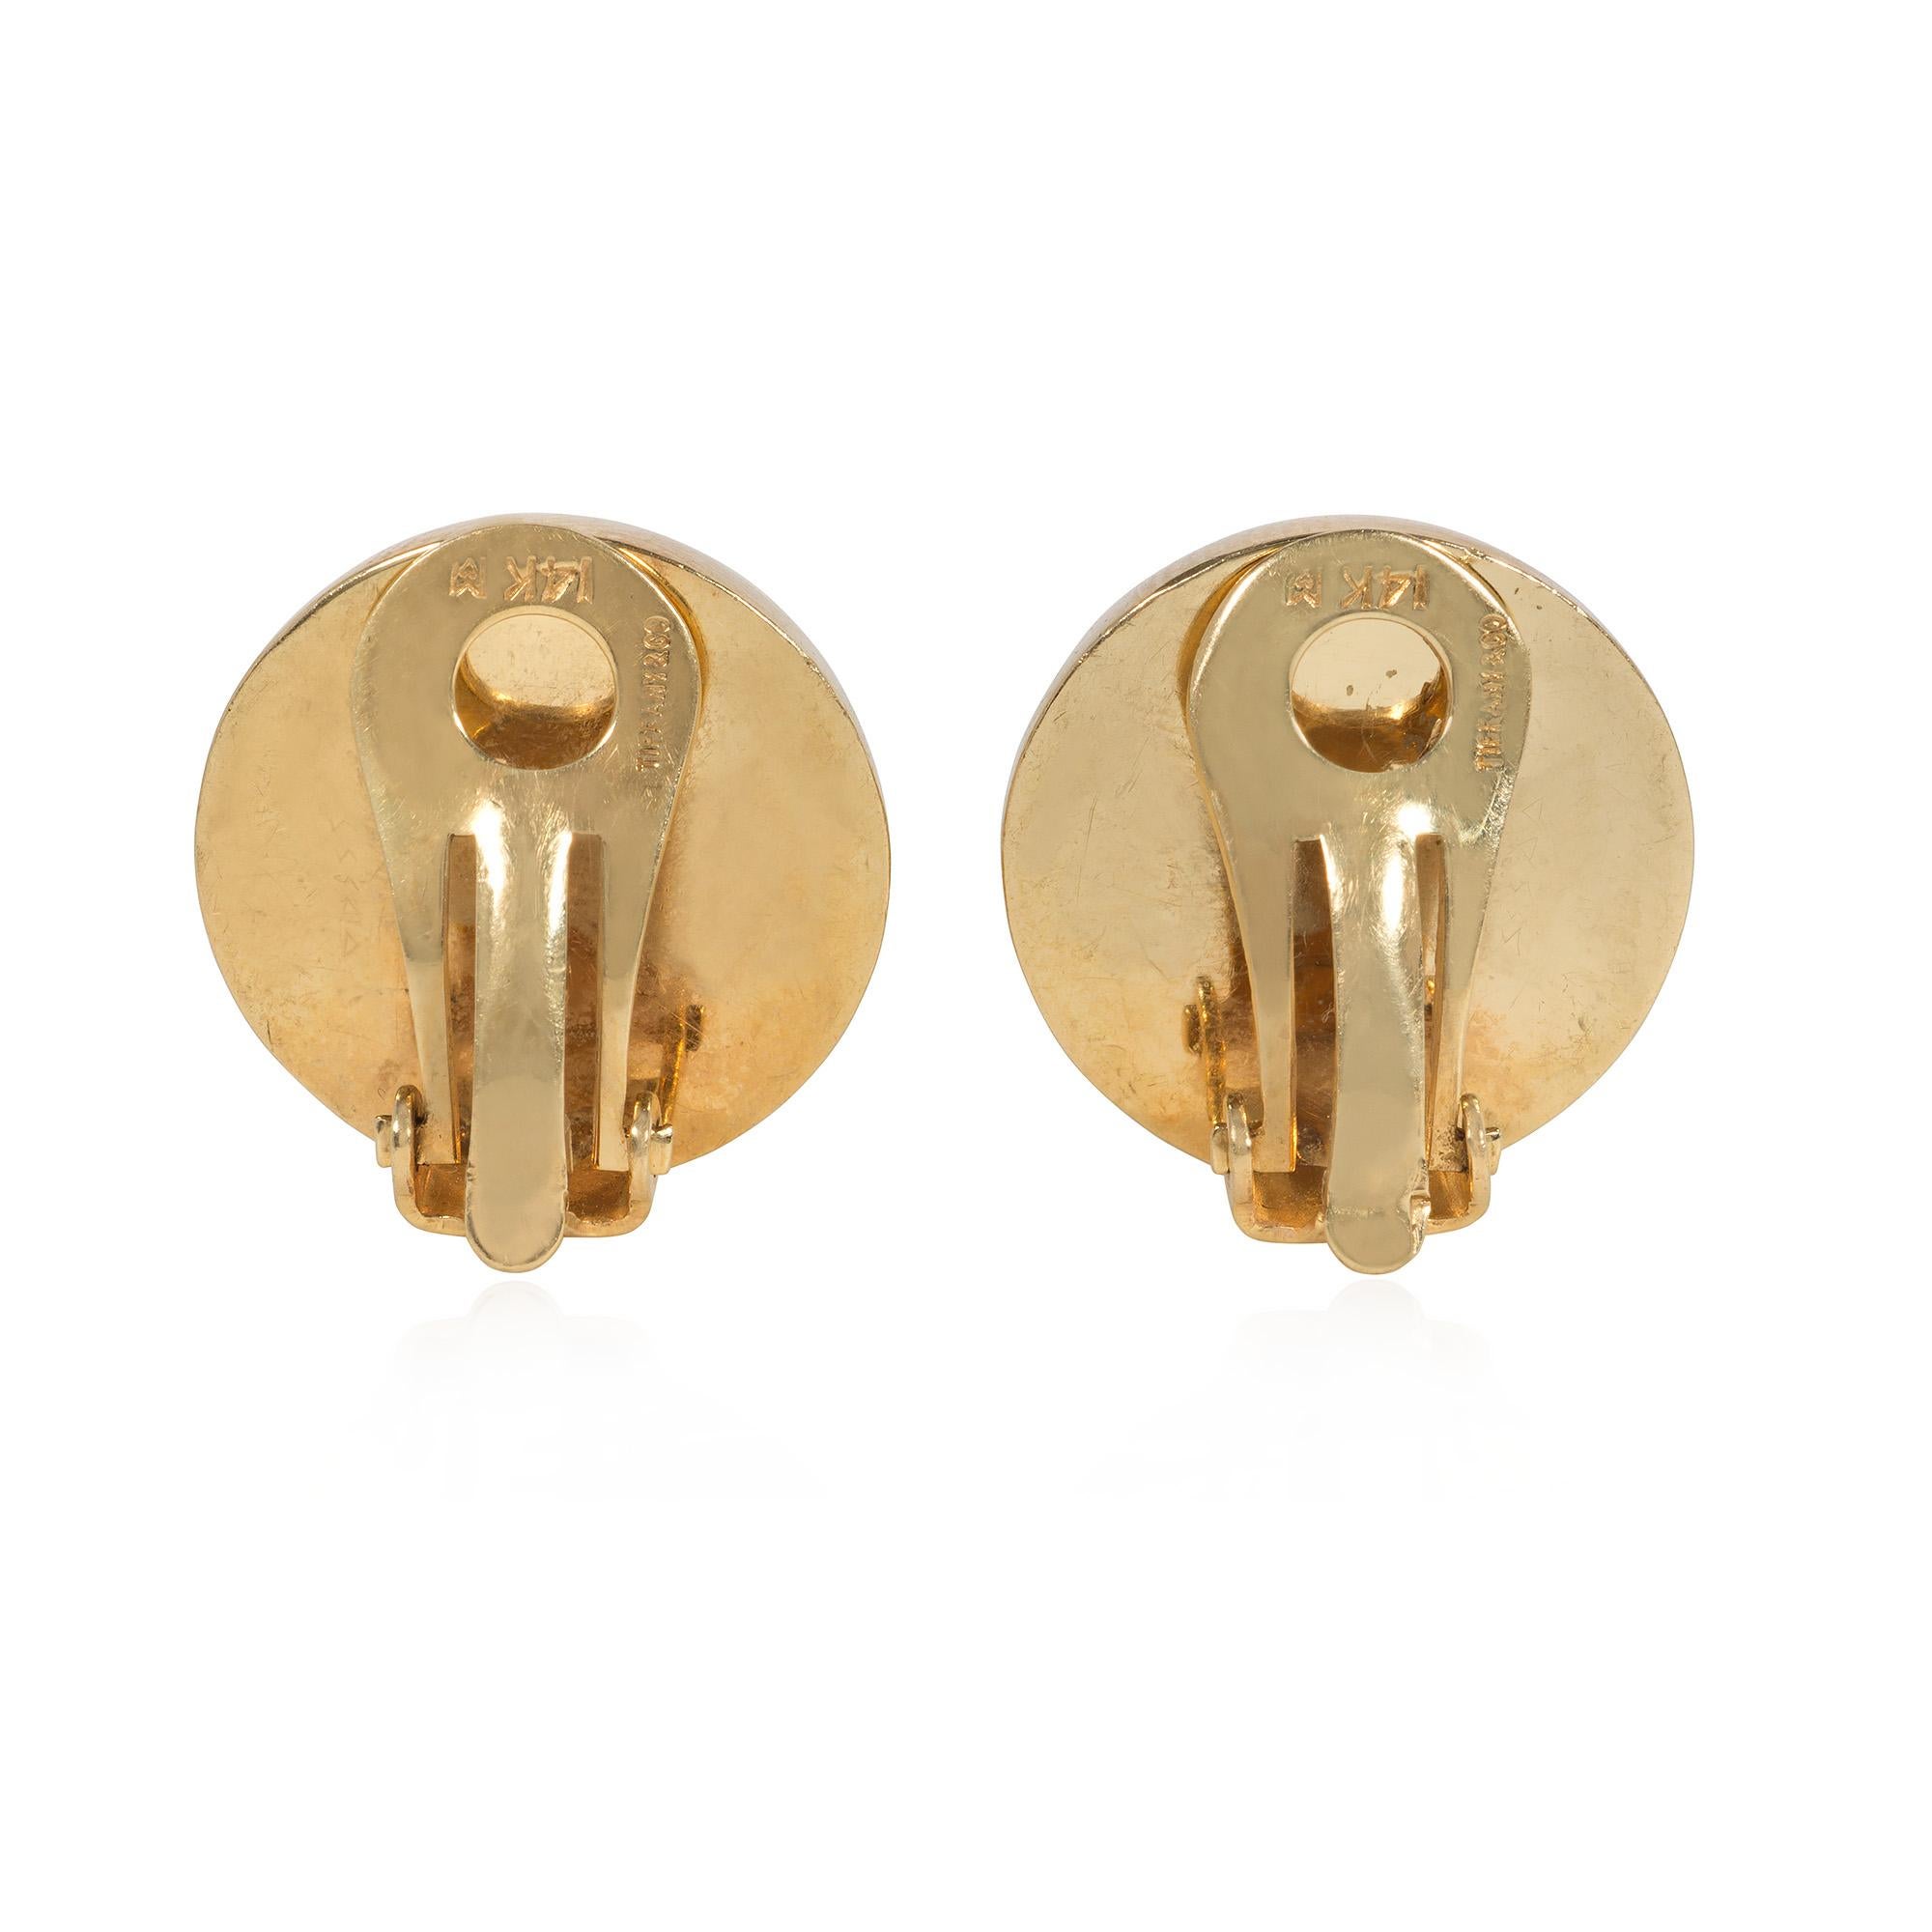 Retro Tiffany 1940s Gold Dome-Shaped Clip Earrings For Sale